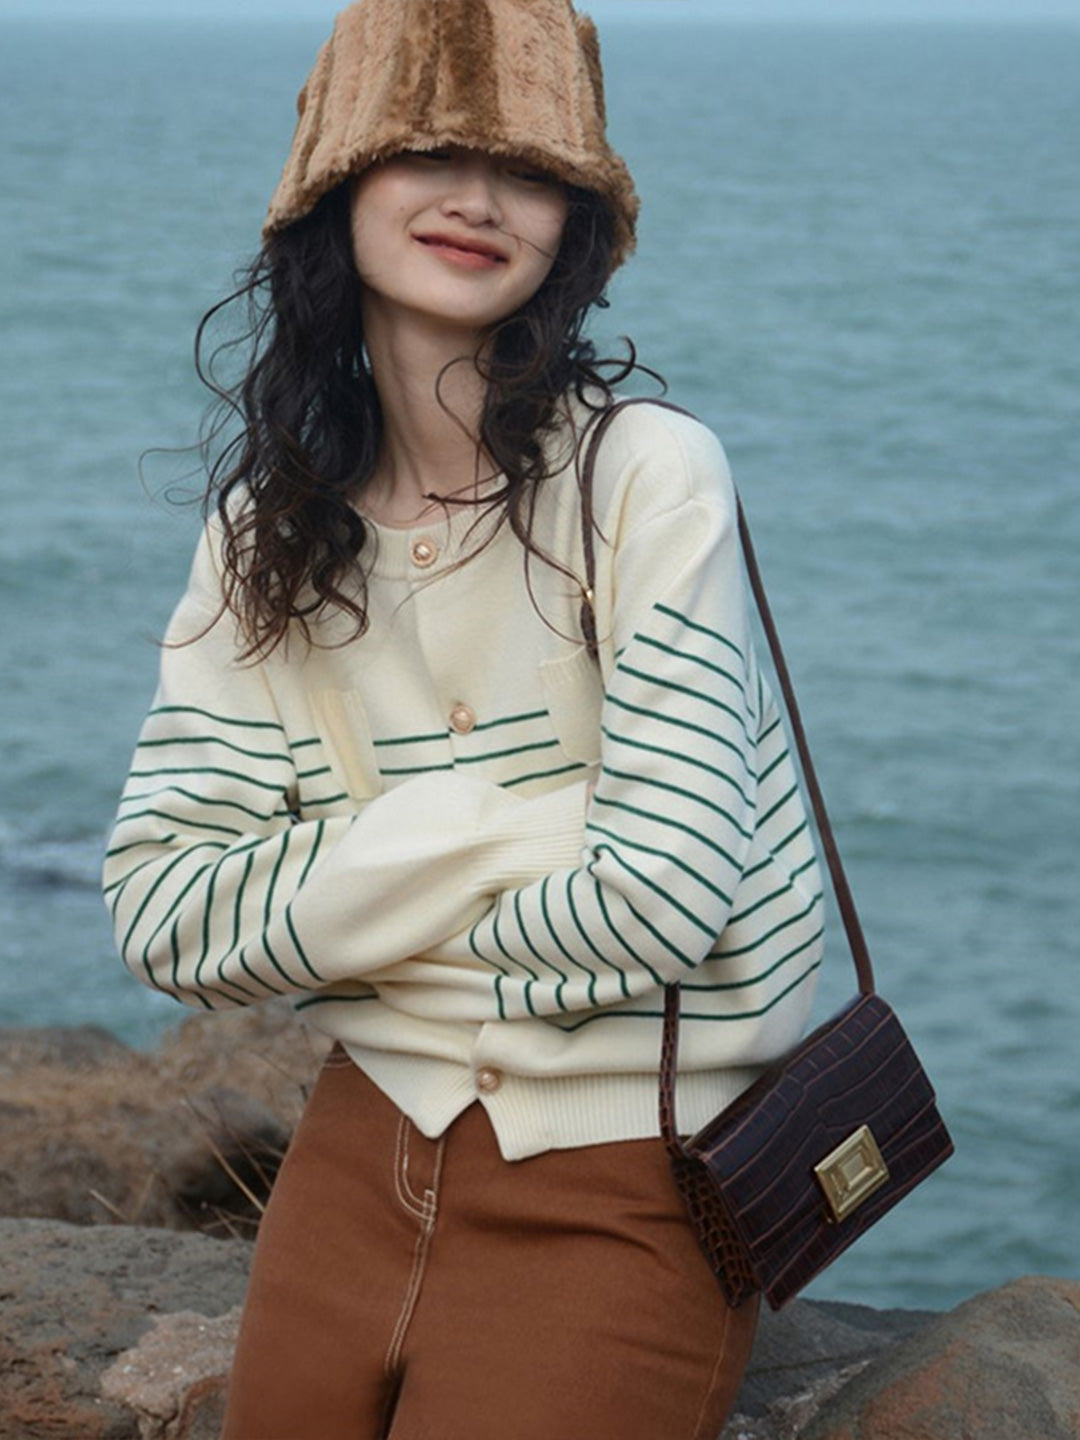 French Vintage Striped Loose Knit Cardigan